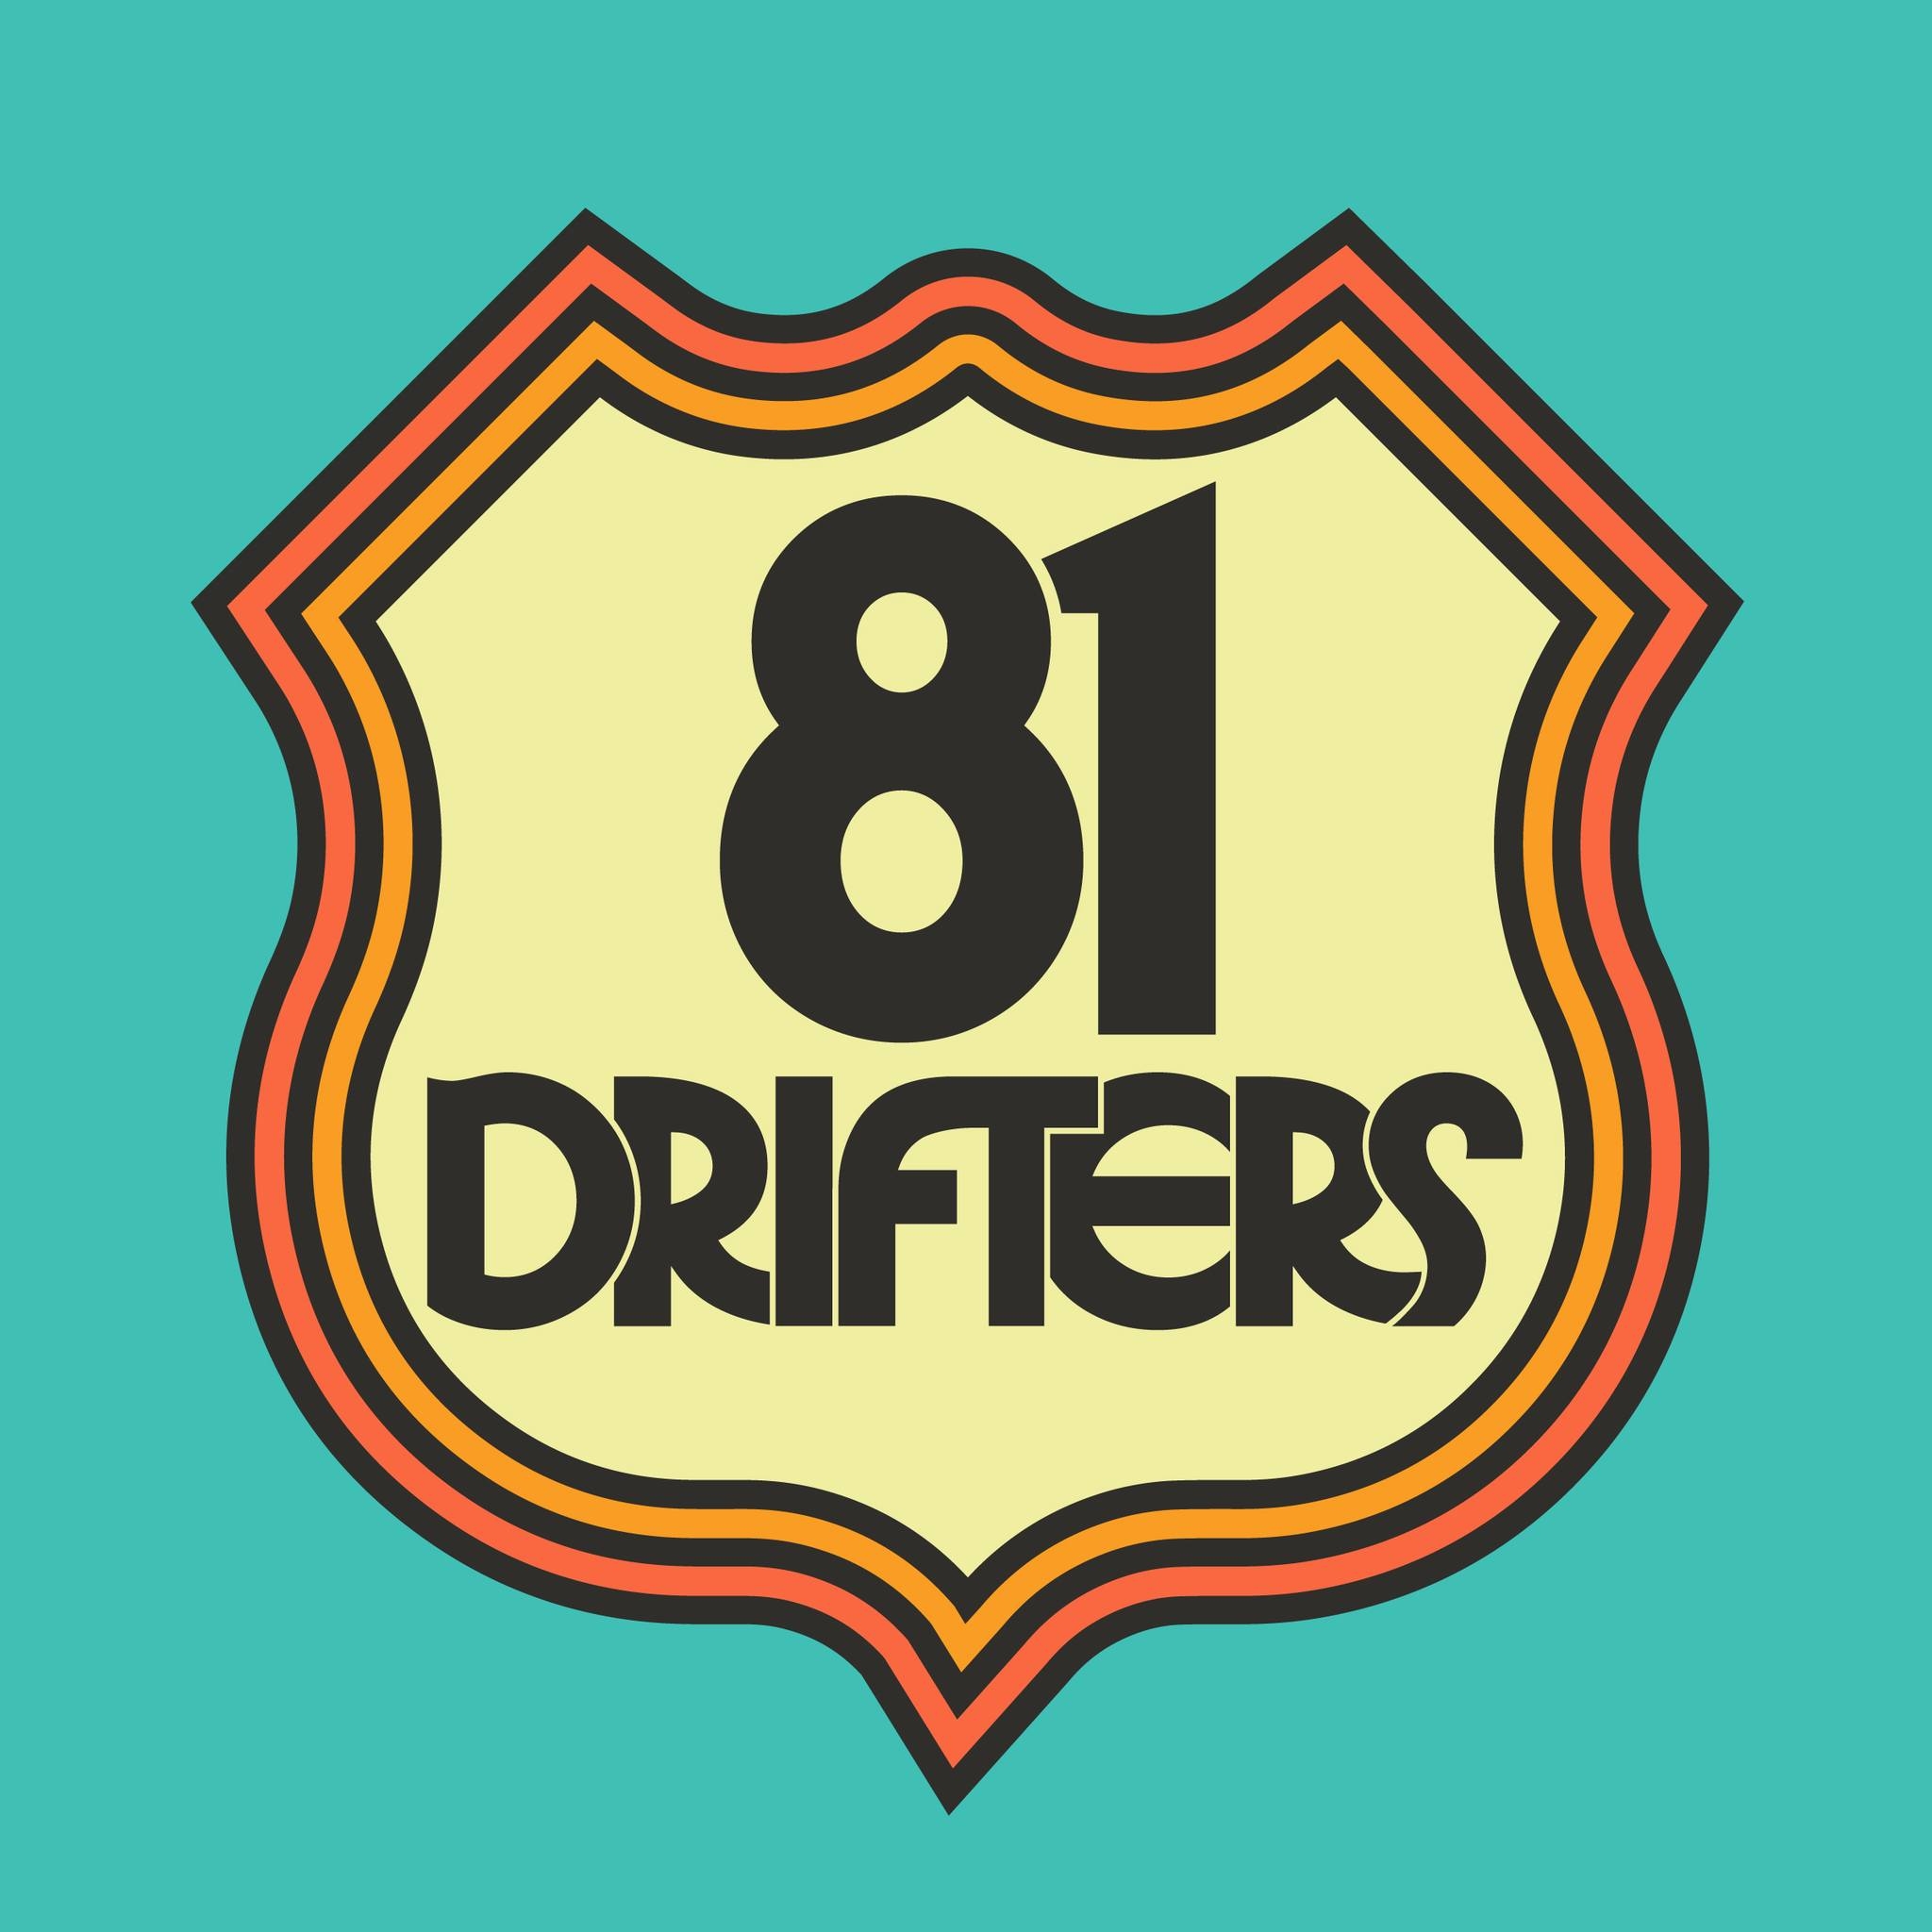 SATURDAY MUSIC MATINEE WITH THE 81 DRIFTERS